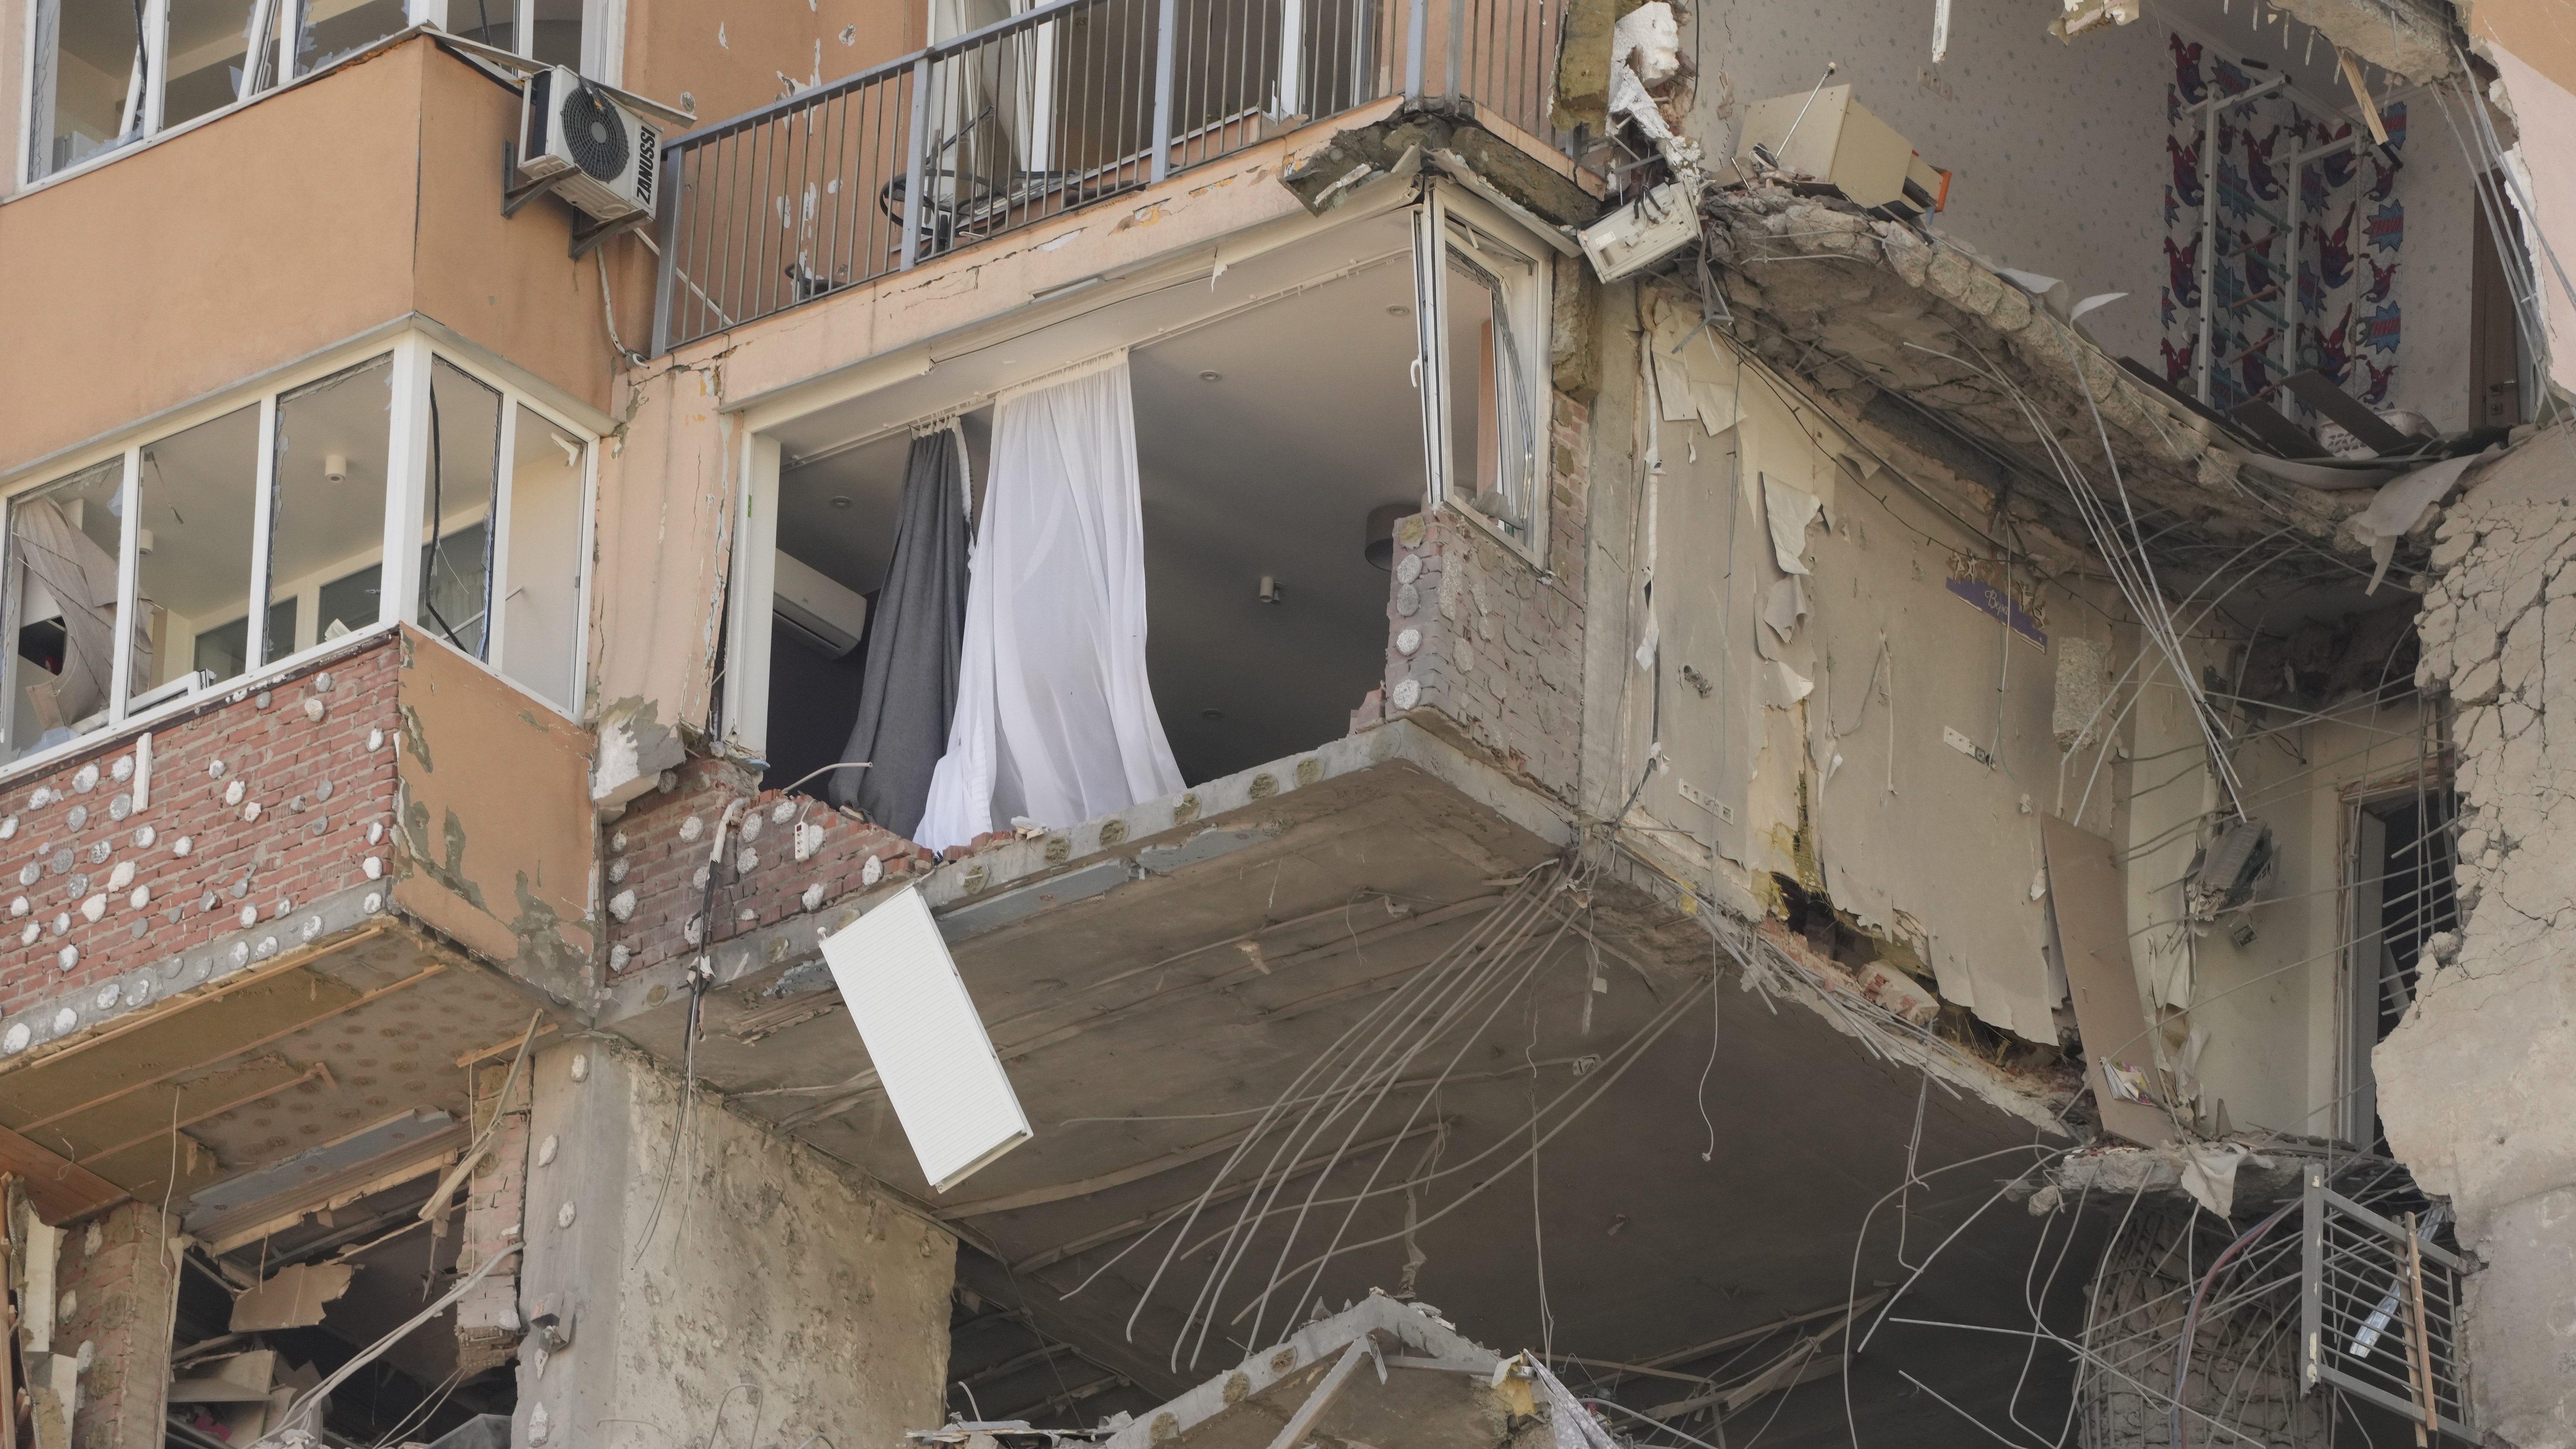 An apartment building damaged following a rocket attack on the city of Kyiv, Ukraine.